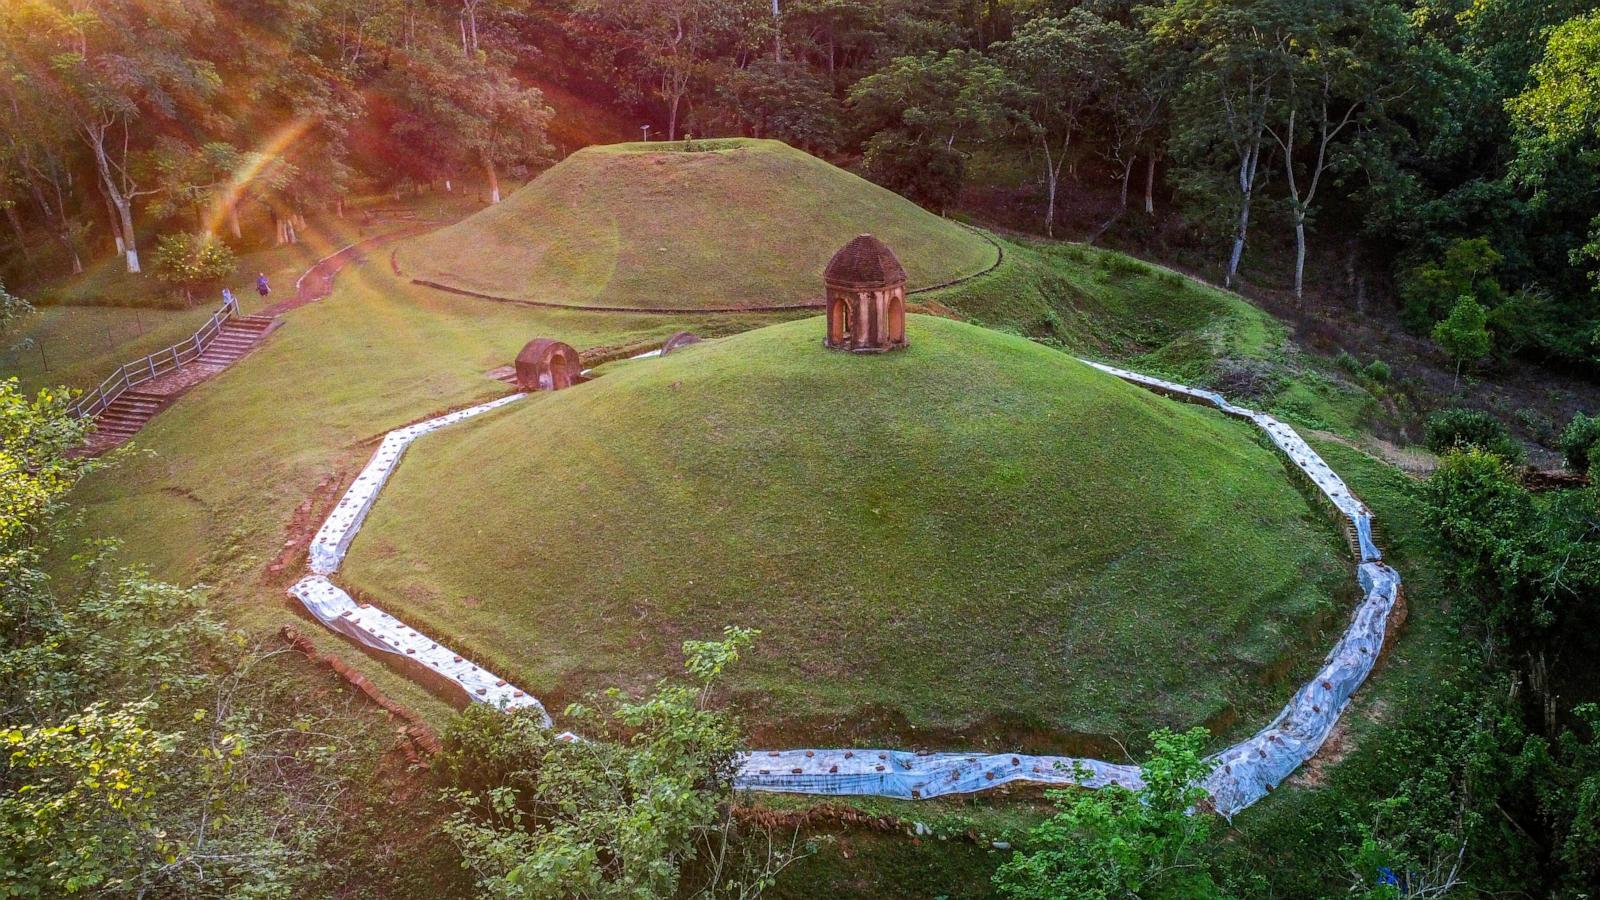 abcnews.go.com - The Associated Press - India's moidam royal burial mounds are its latest World Heritage Site